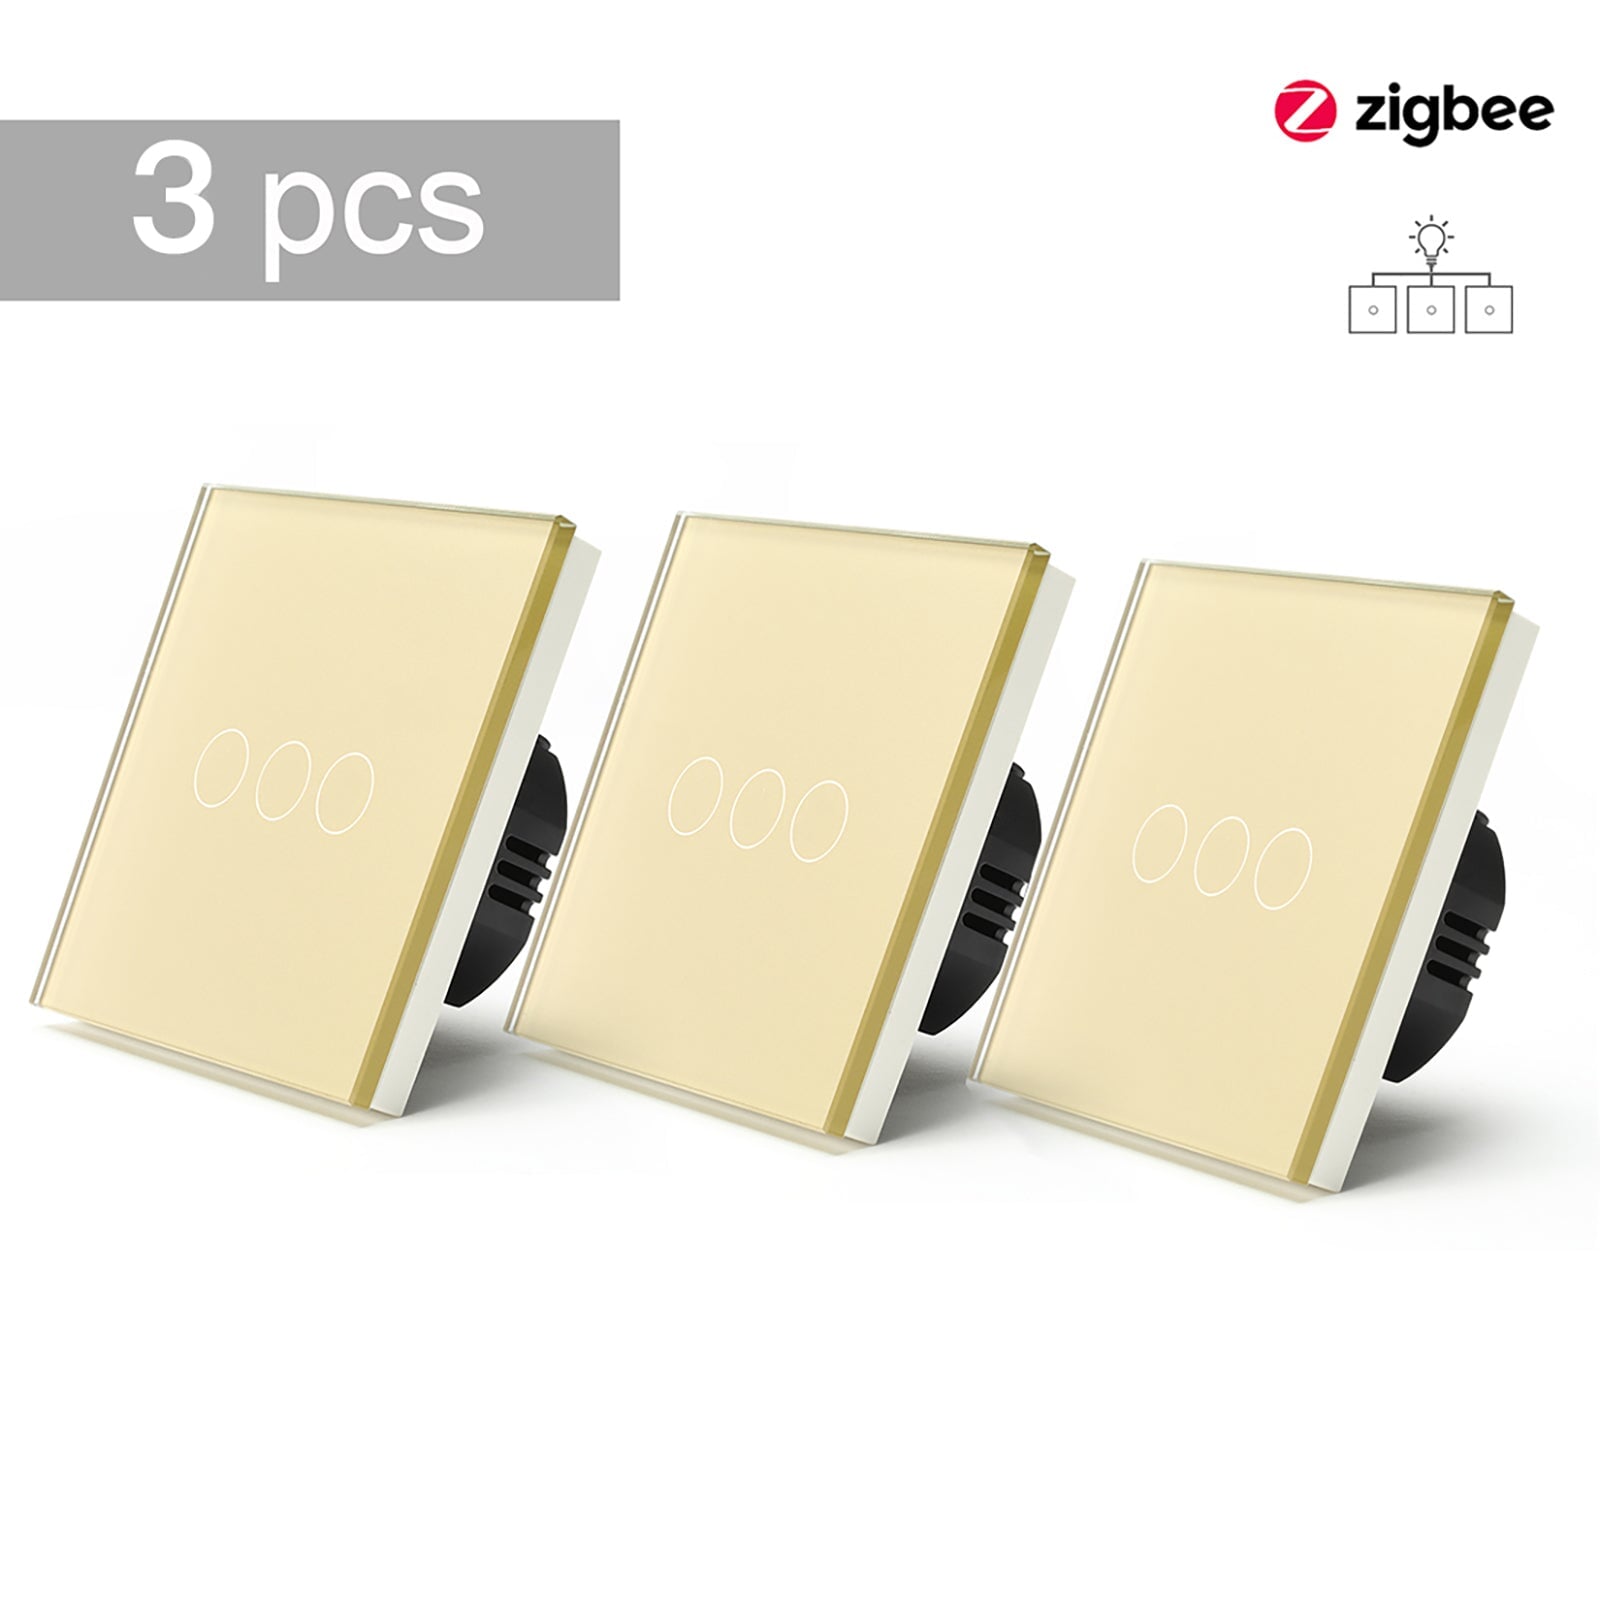 BSEED Zigbee Single Live Line Switch 1/2/3 Gang 1/2/3 Way Wall Smart Light Switch Single Live Line 1/2/3 pack Light Switches Bseedswitch Golden 3Gang 3 Pcs/Pack